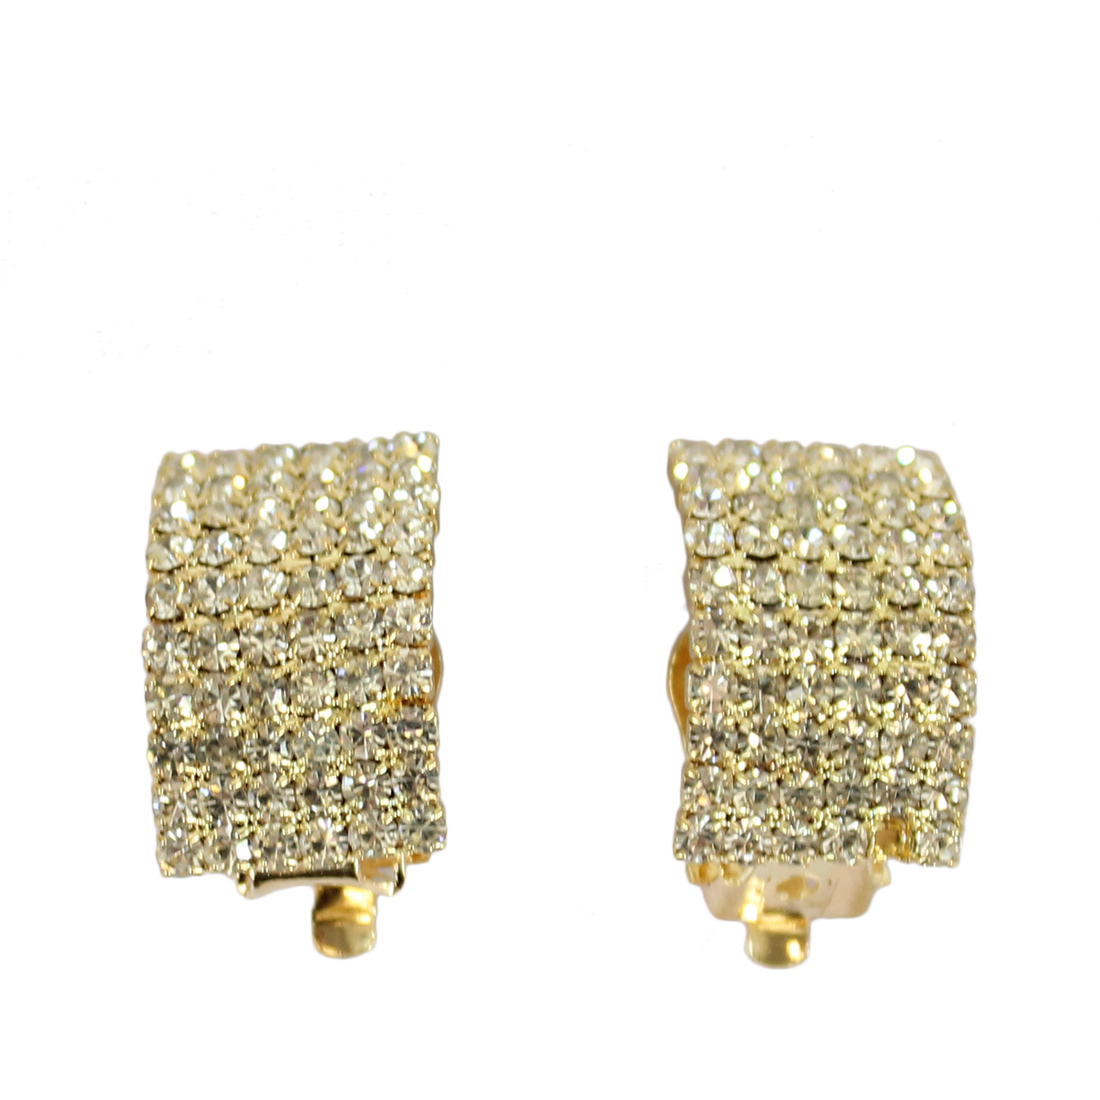 Bended diamond square style earrings